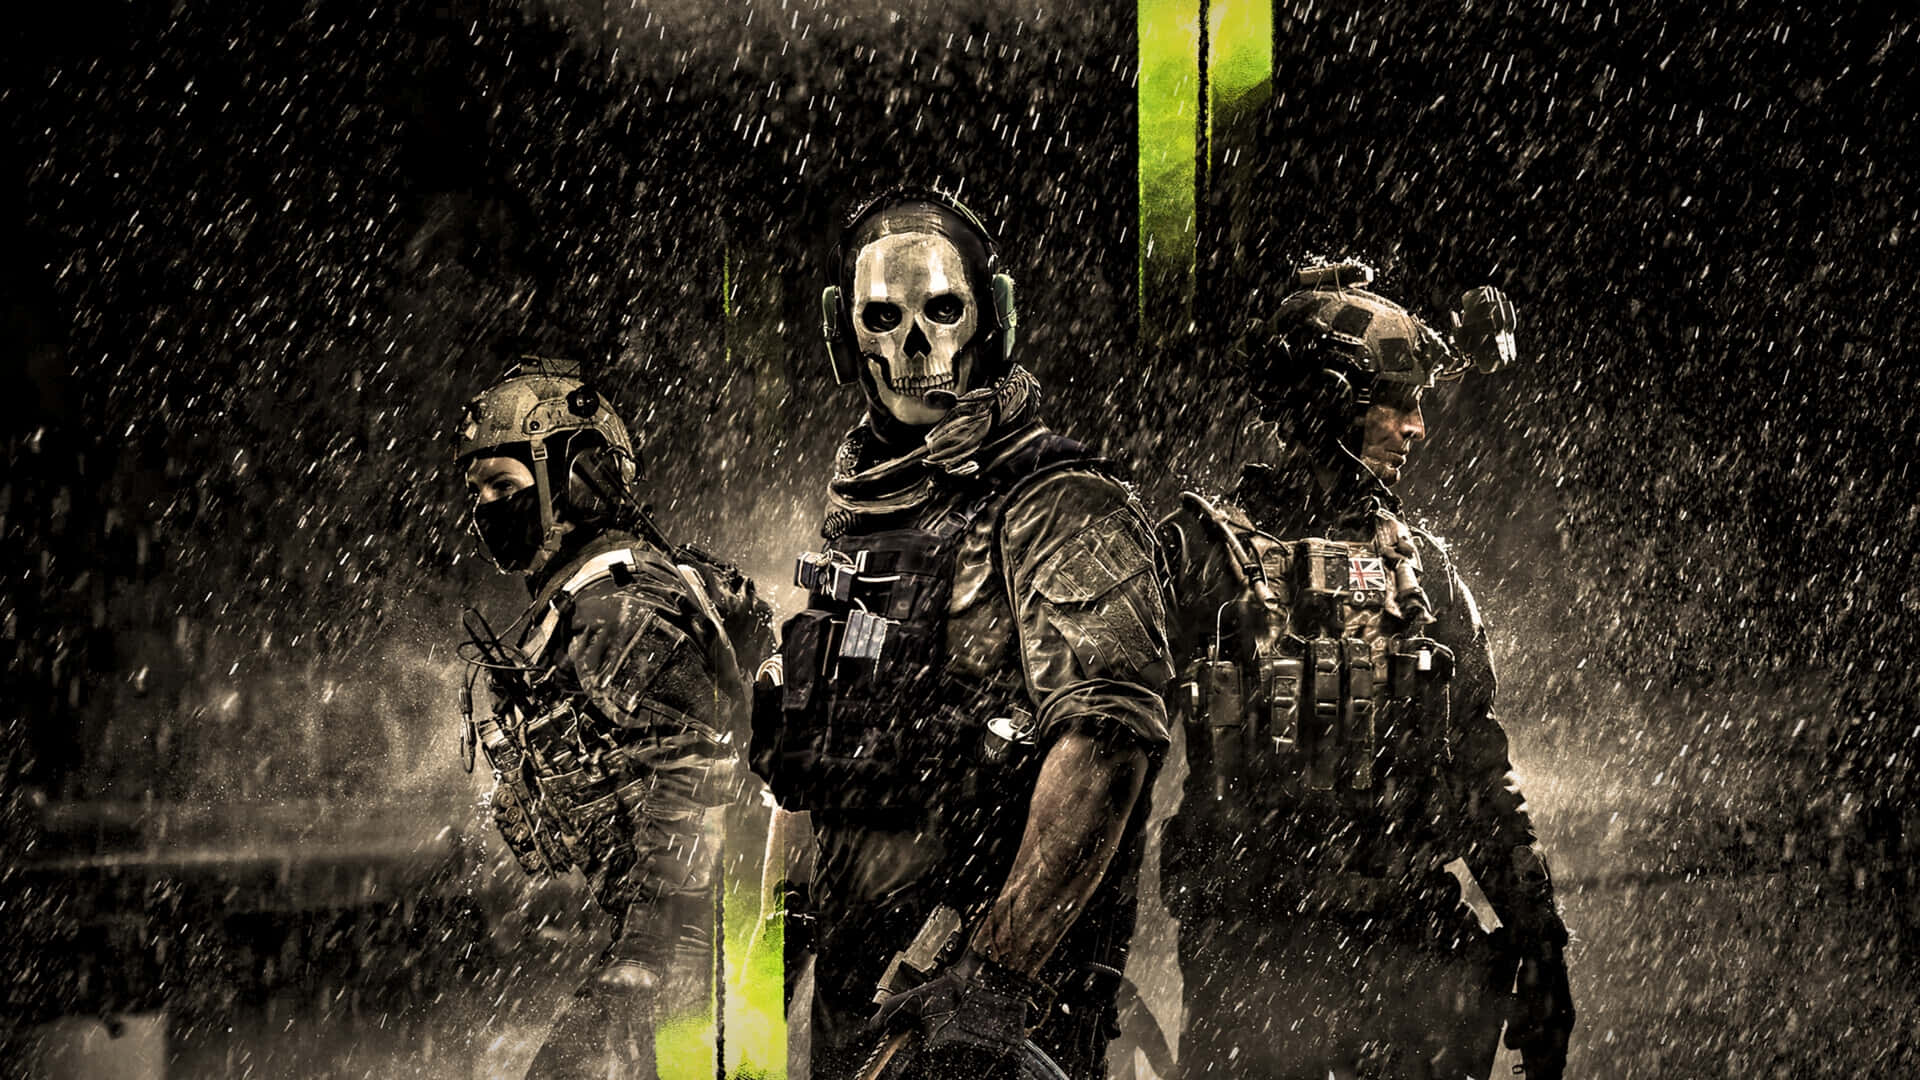 Dare to answer the Call of Duty Wallpaper